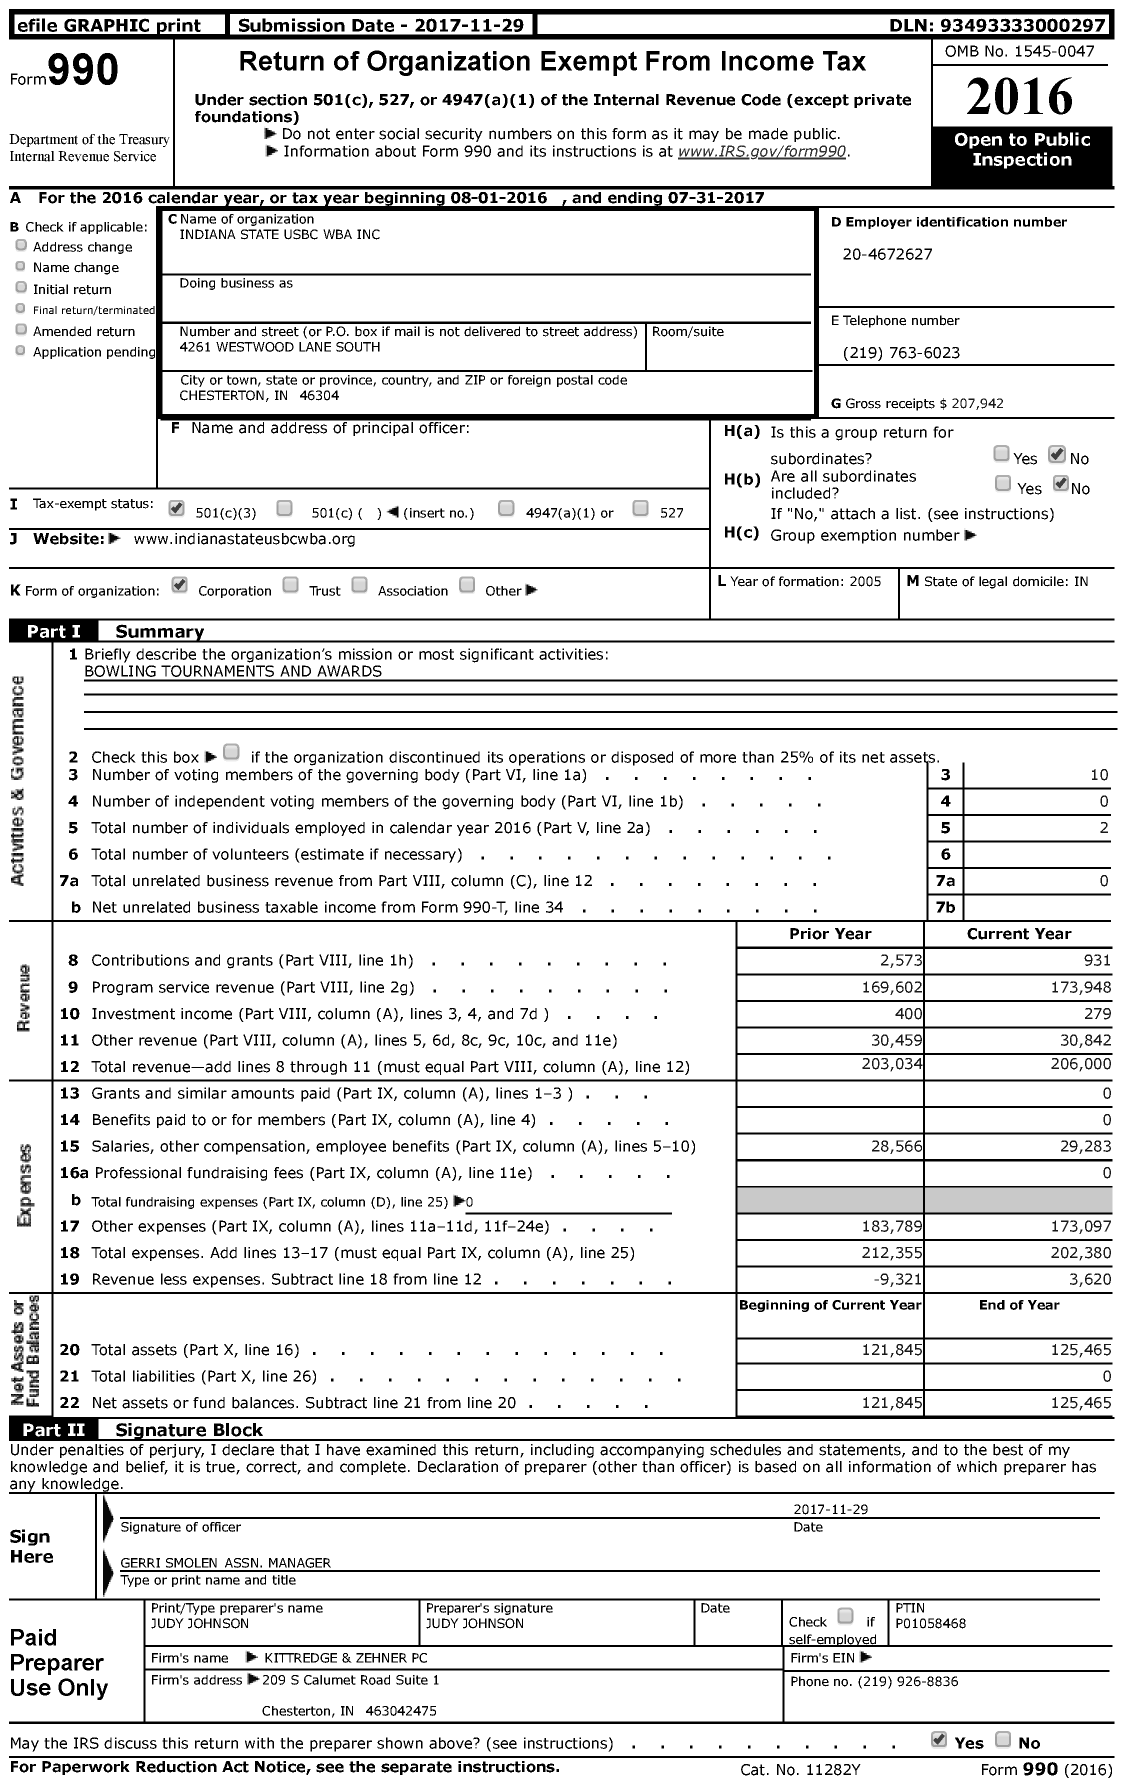 Image of first page of 2016 Form 990 for United States Bowling Congress - 84207 Indiana State Usbc Wba